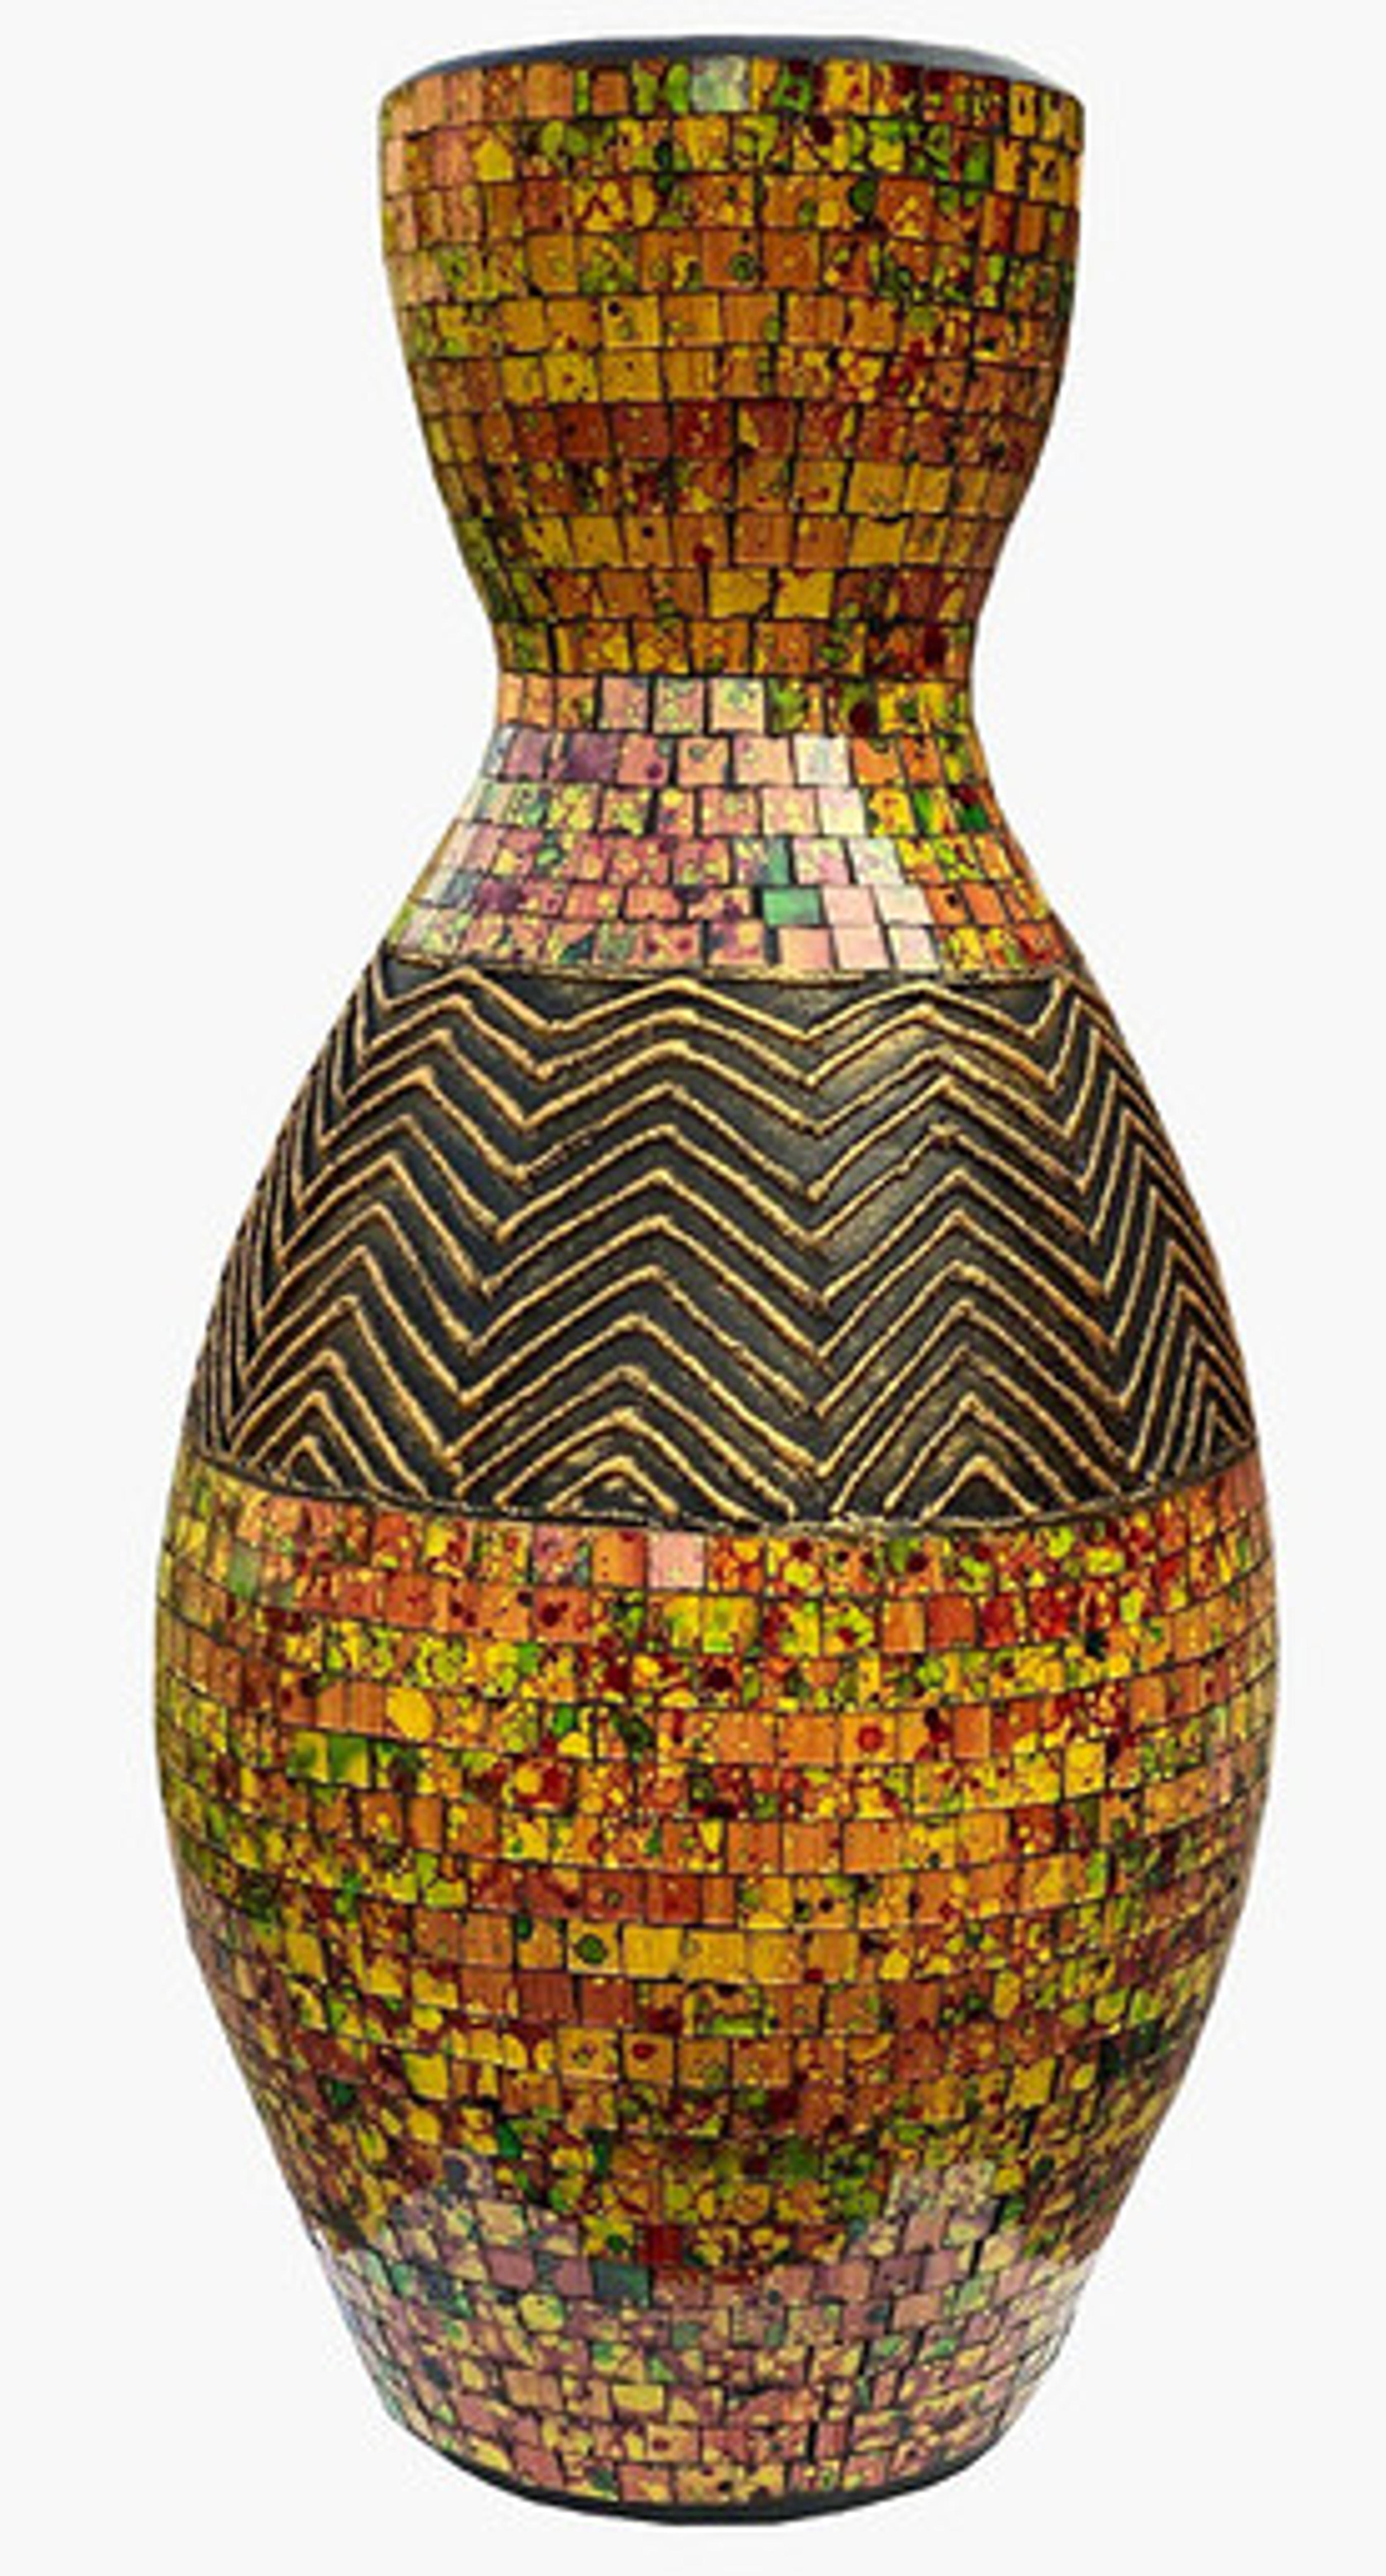 Zorigs Floor Vase – Tall Cylinder Made of Terracotta with Red, Orange, Yellow, Green, Black Glass Mosaic Pieces – Exquisite Home Décor Accent Piece – 23.6 x 10.2 Inches - Zorigs